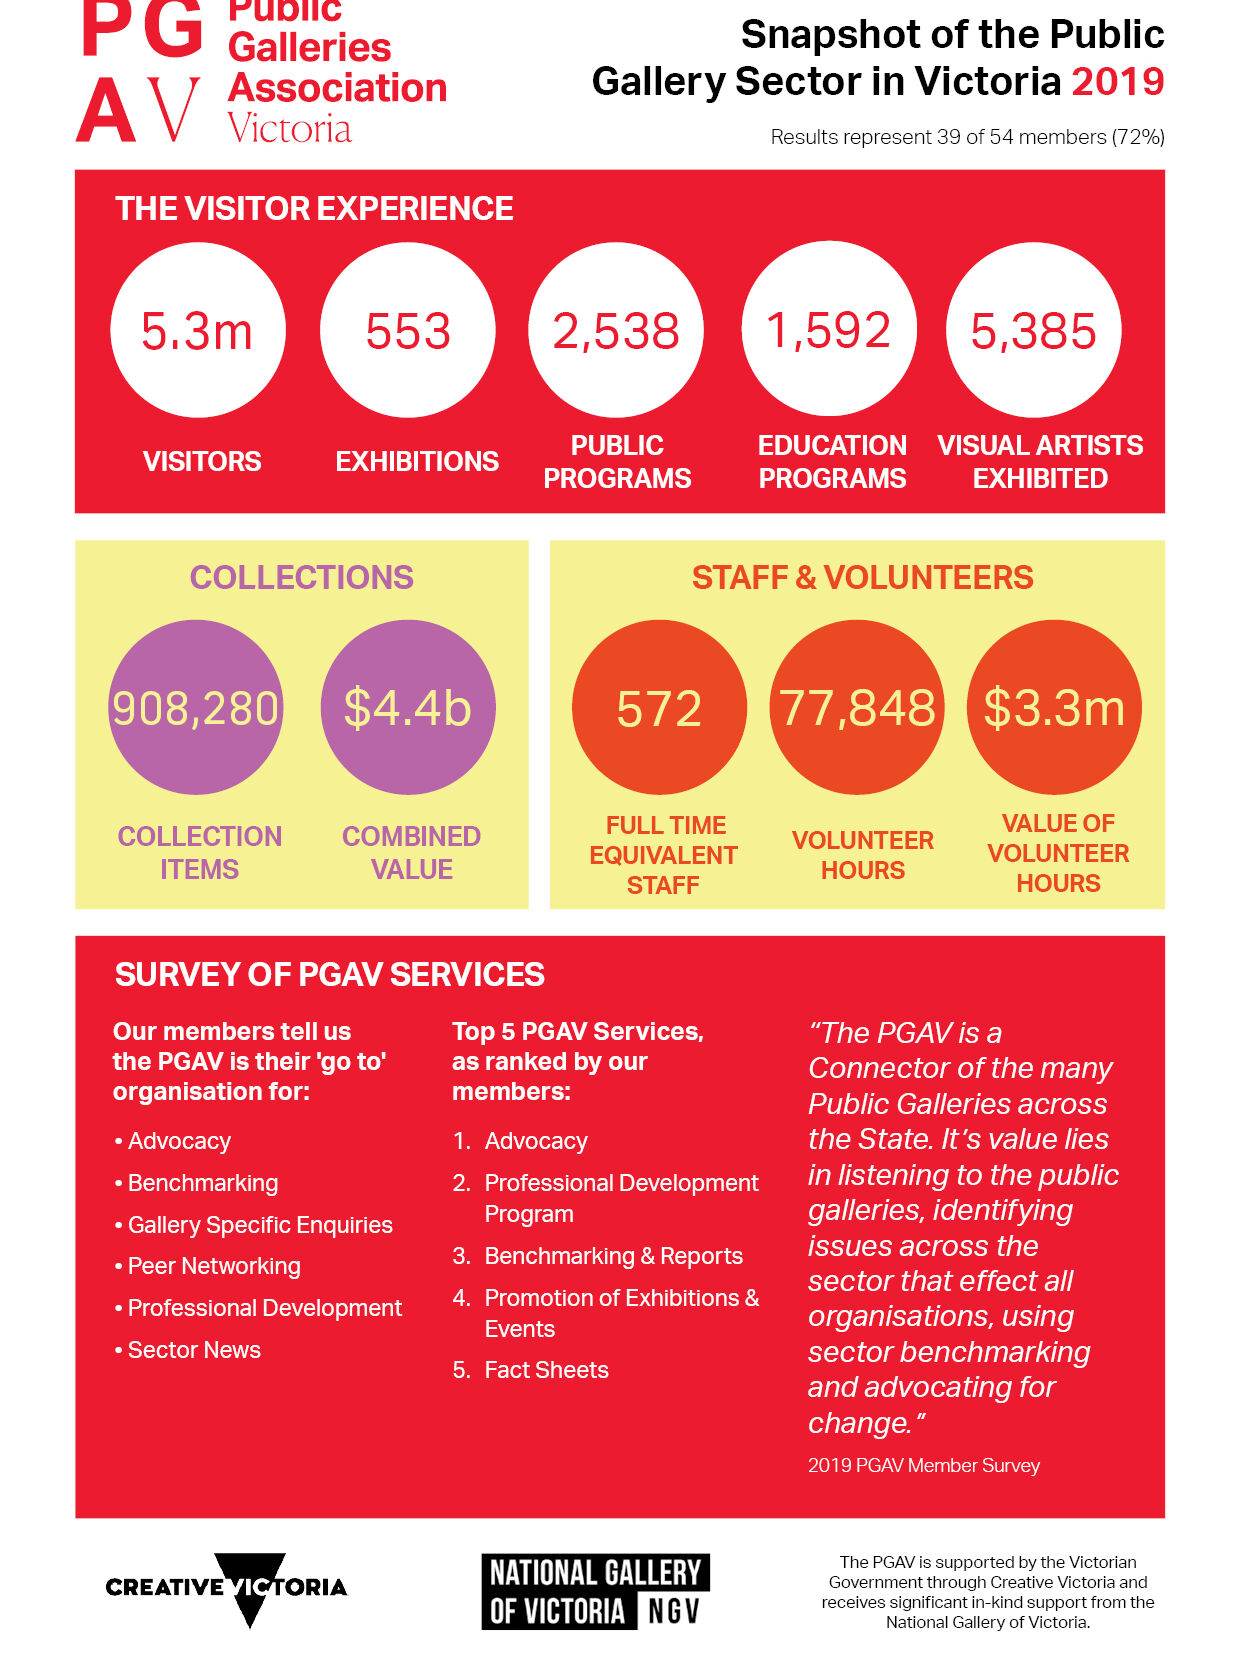 Snapshot of the Public Gallery Sector in Victoria 2019